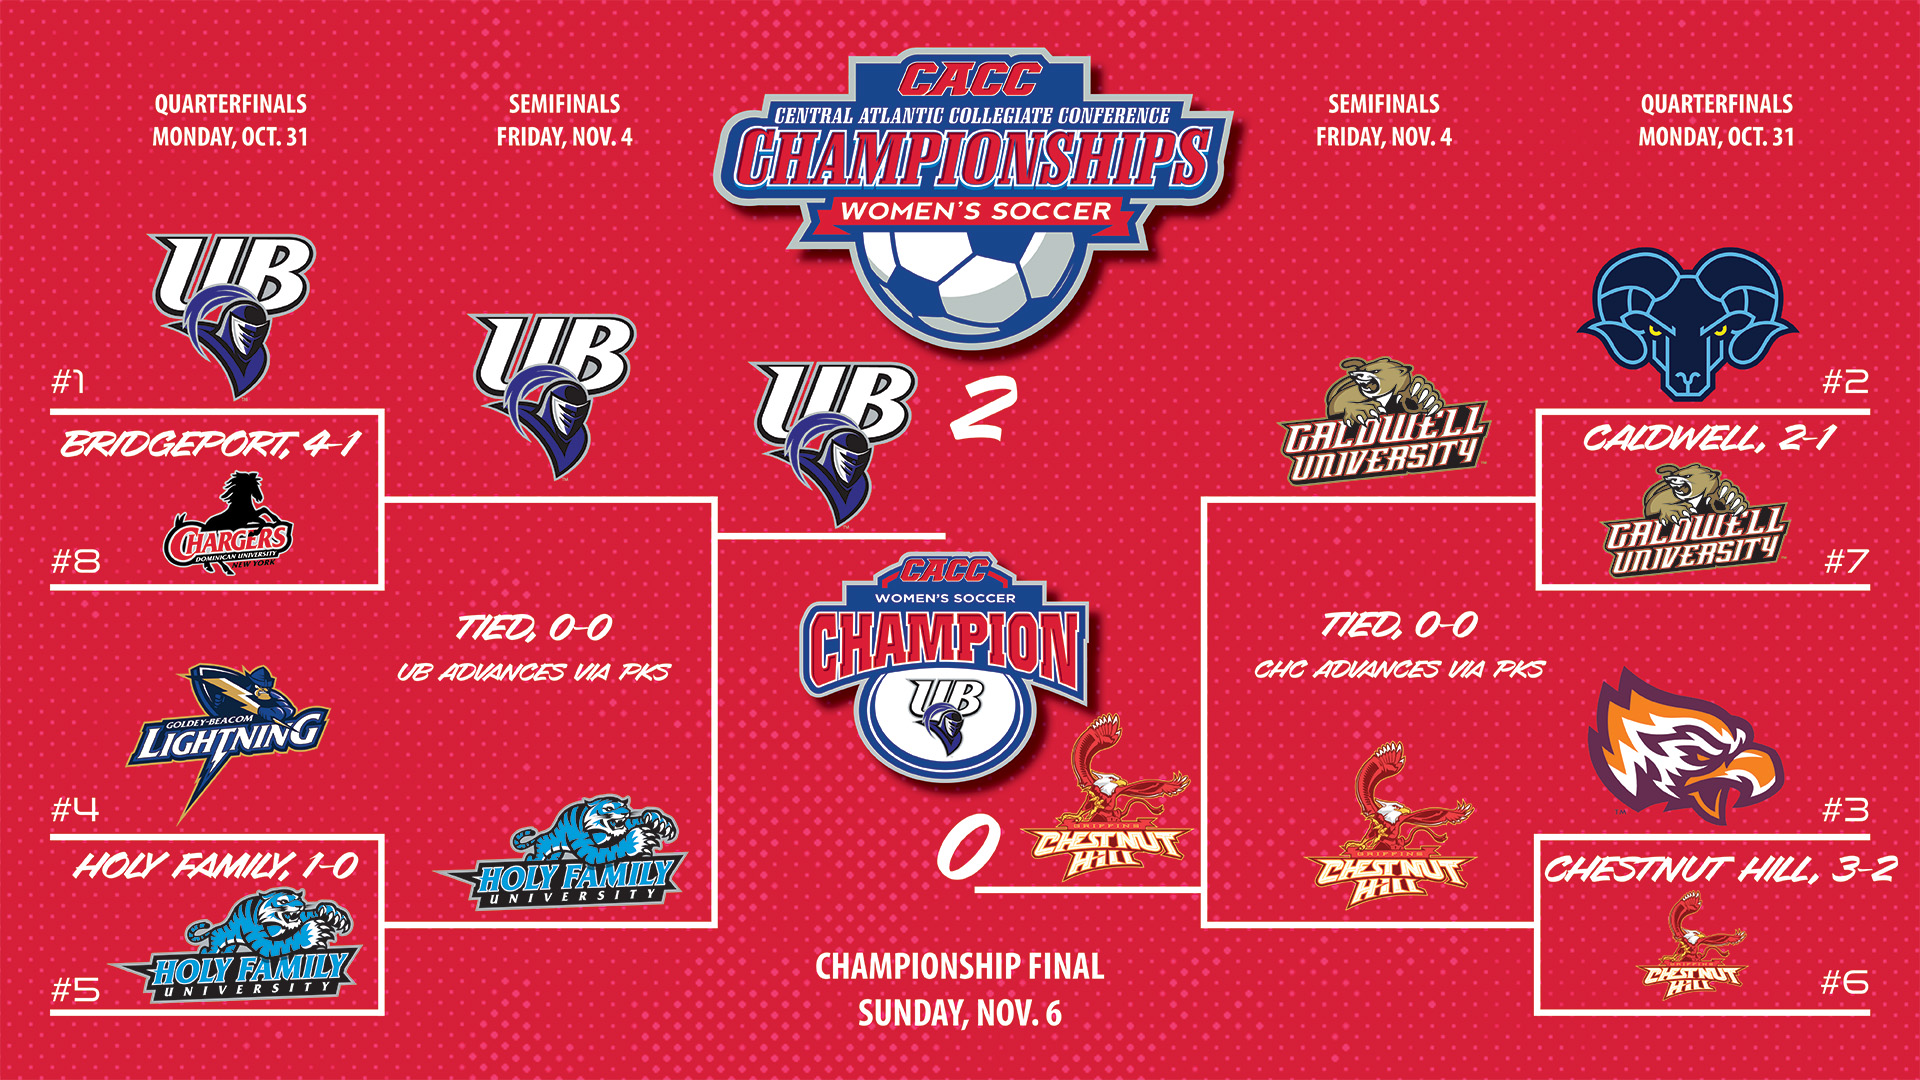 2022 CACC Women's Soccer Championship Central